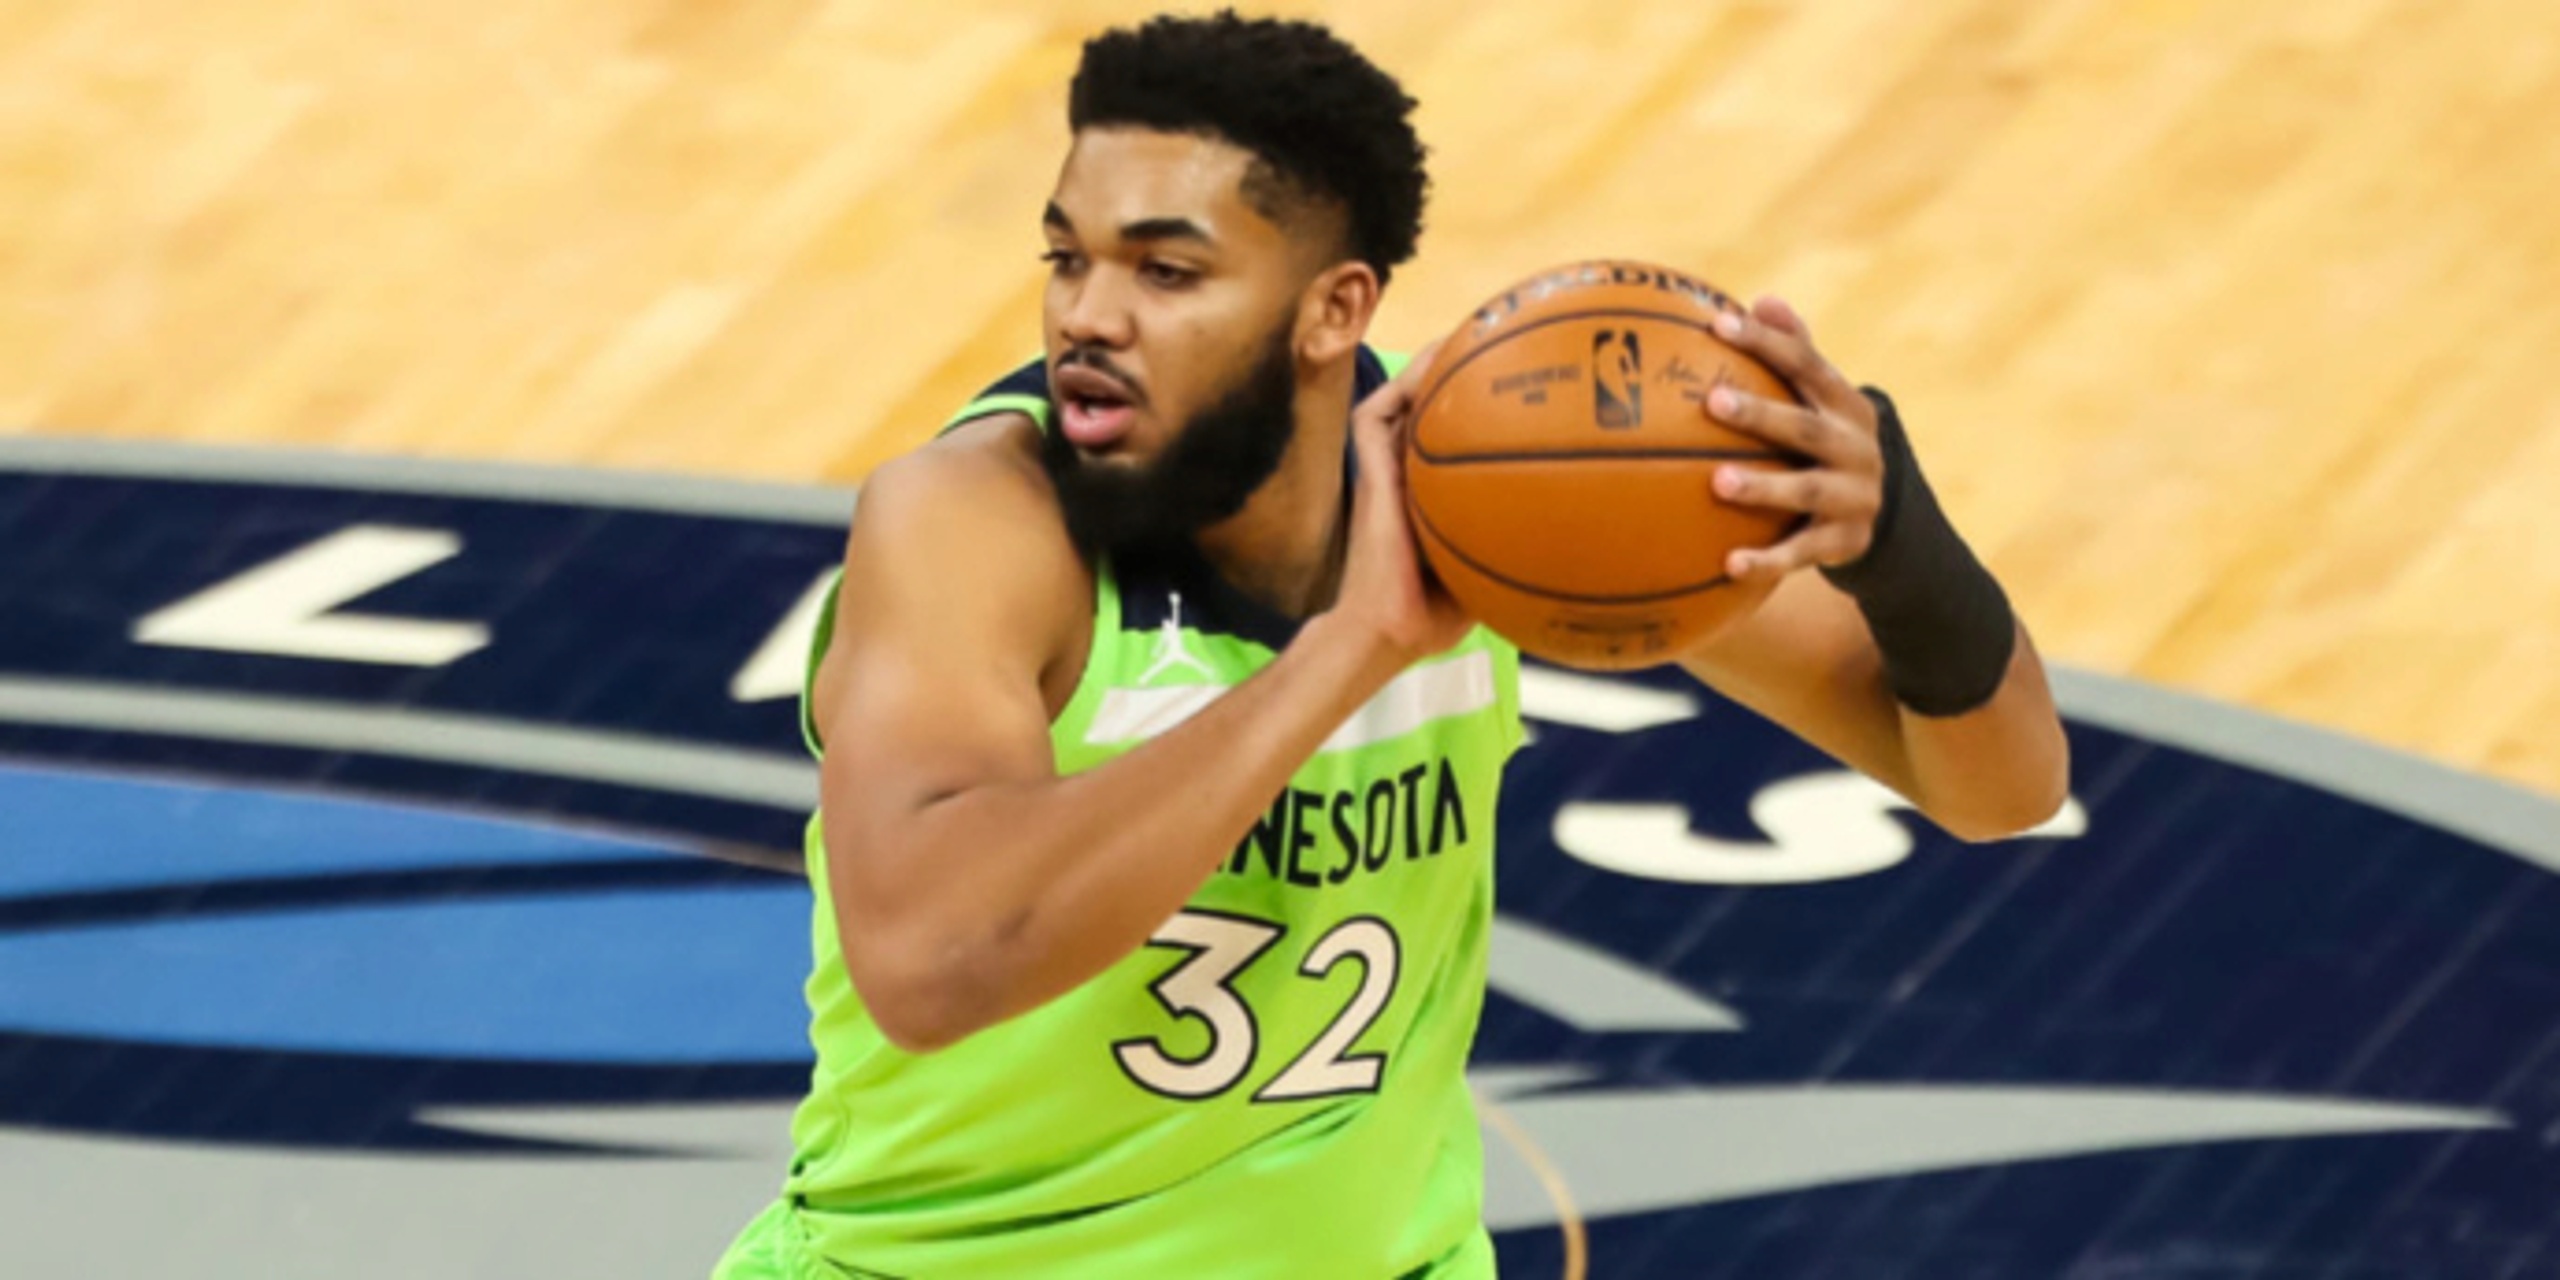 Karl-Anthony Towns expected to return from COVID-19 absence on Wednesday